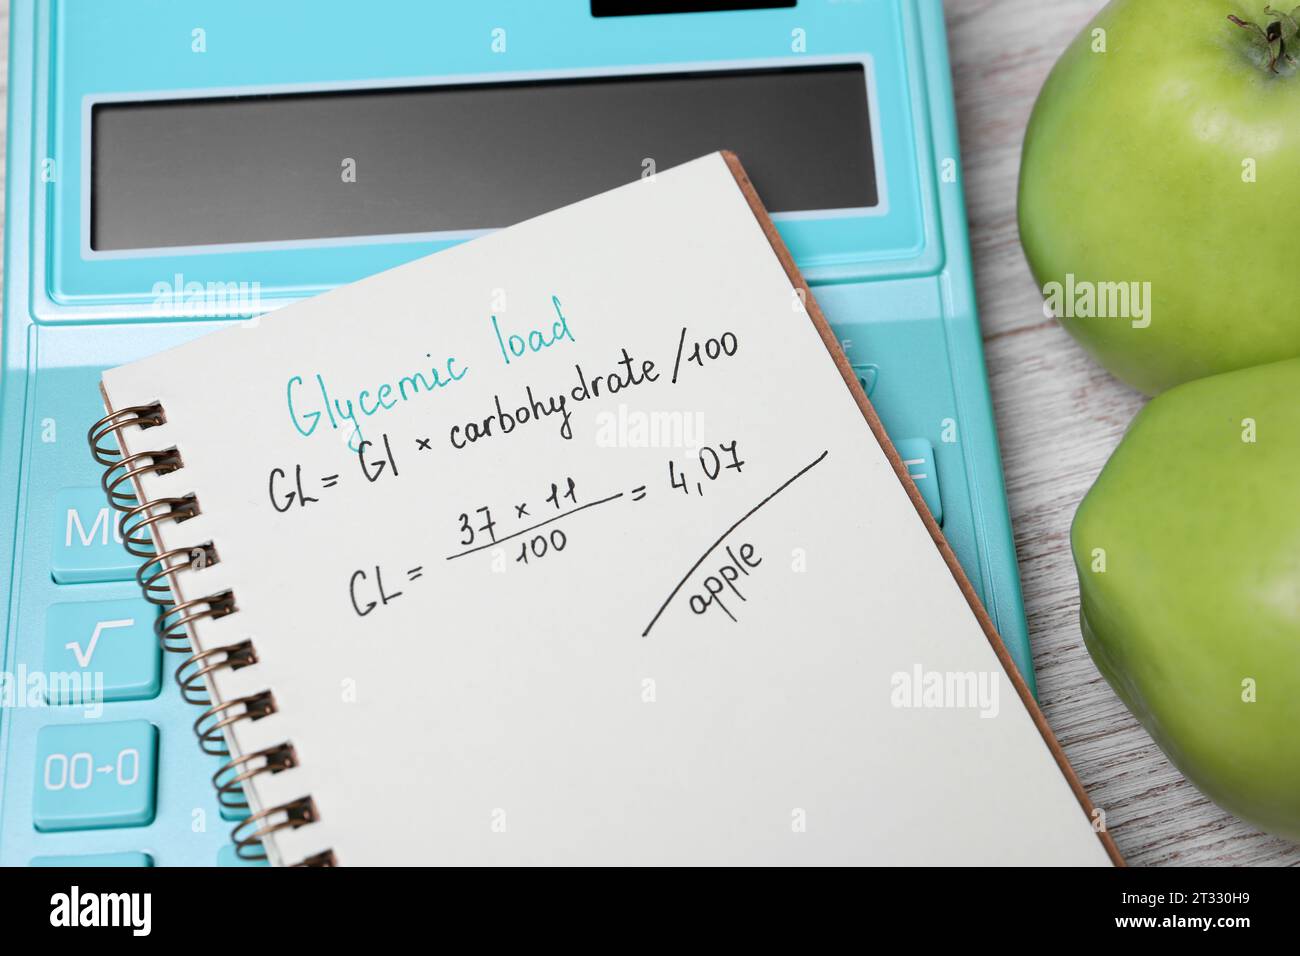 Notebook with calculated glycemic load for apples, calculator and fresh fruits on table, closeup Stock Photo